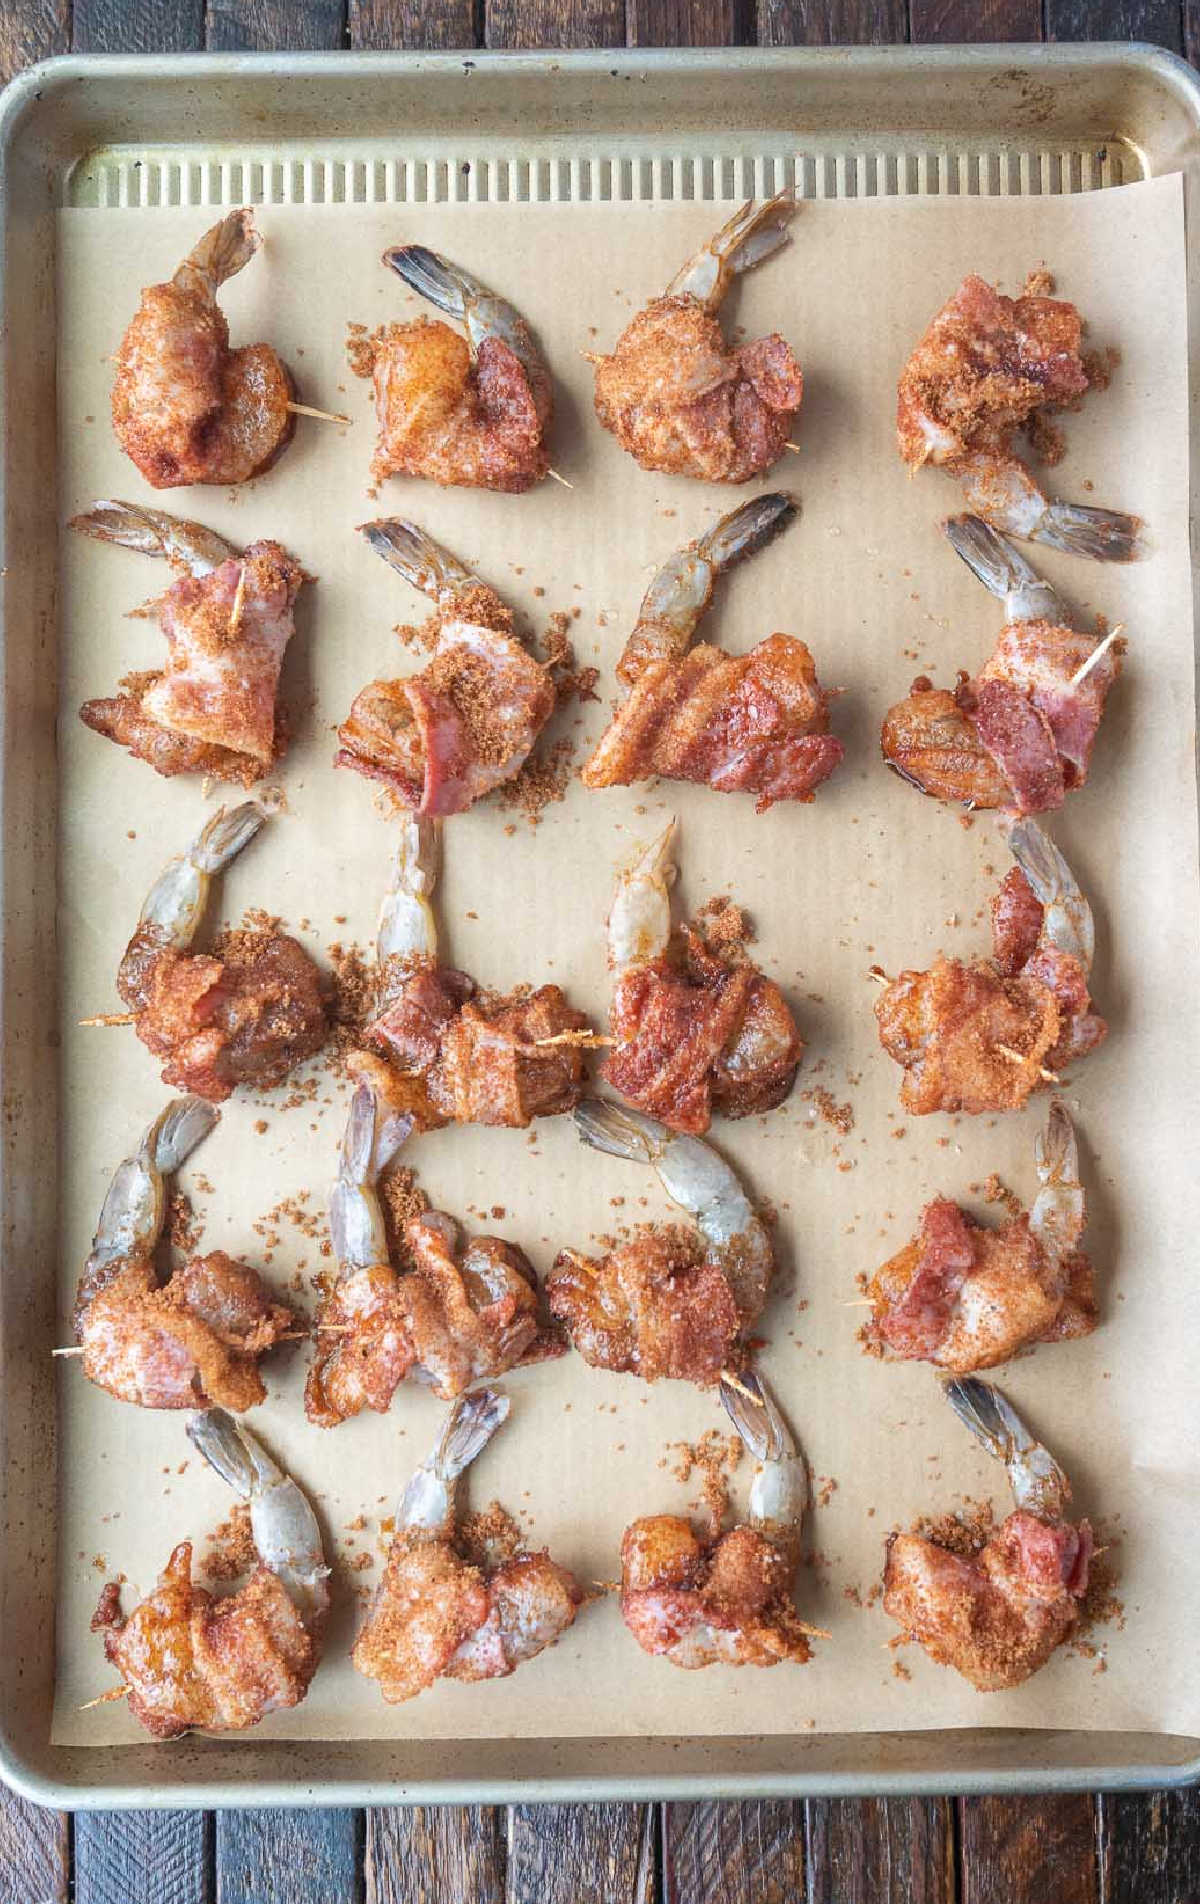 Bacon wrapped shrimp placed on a baking sheet.